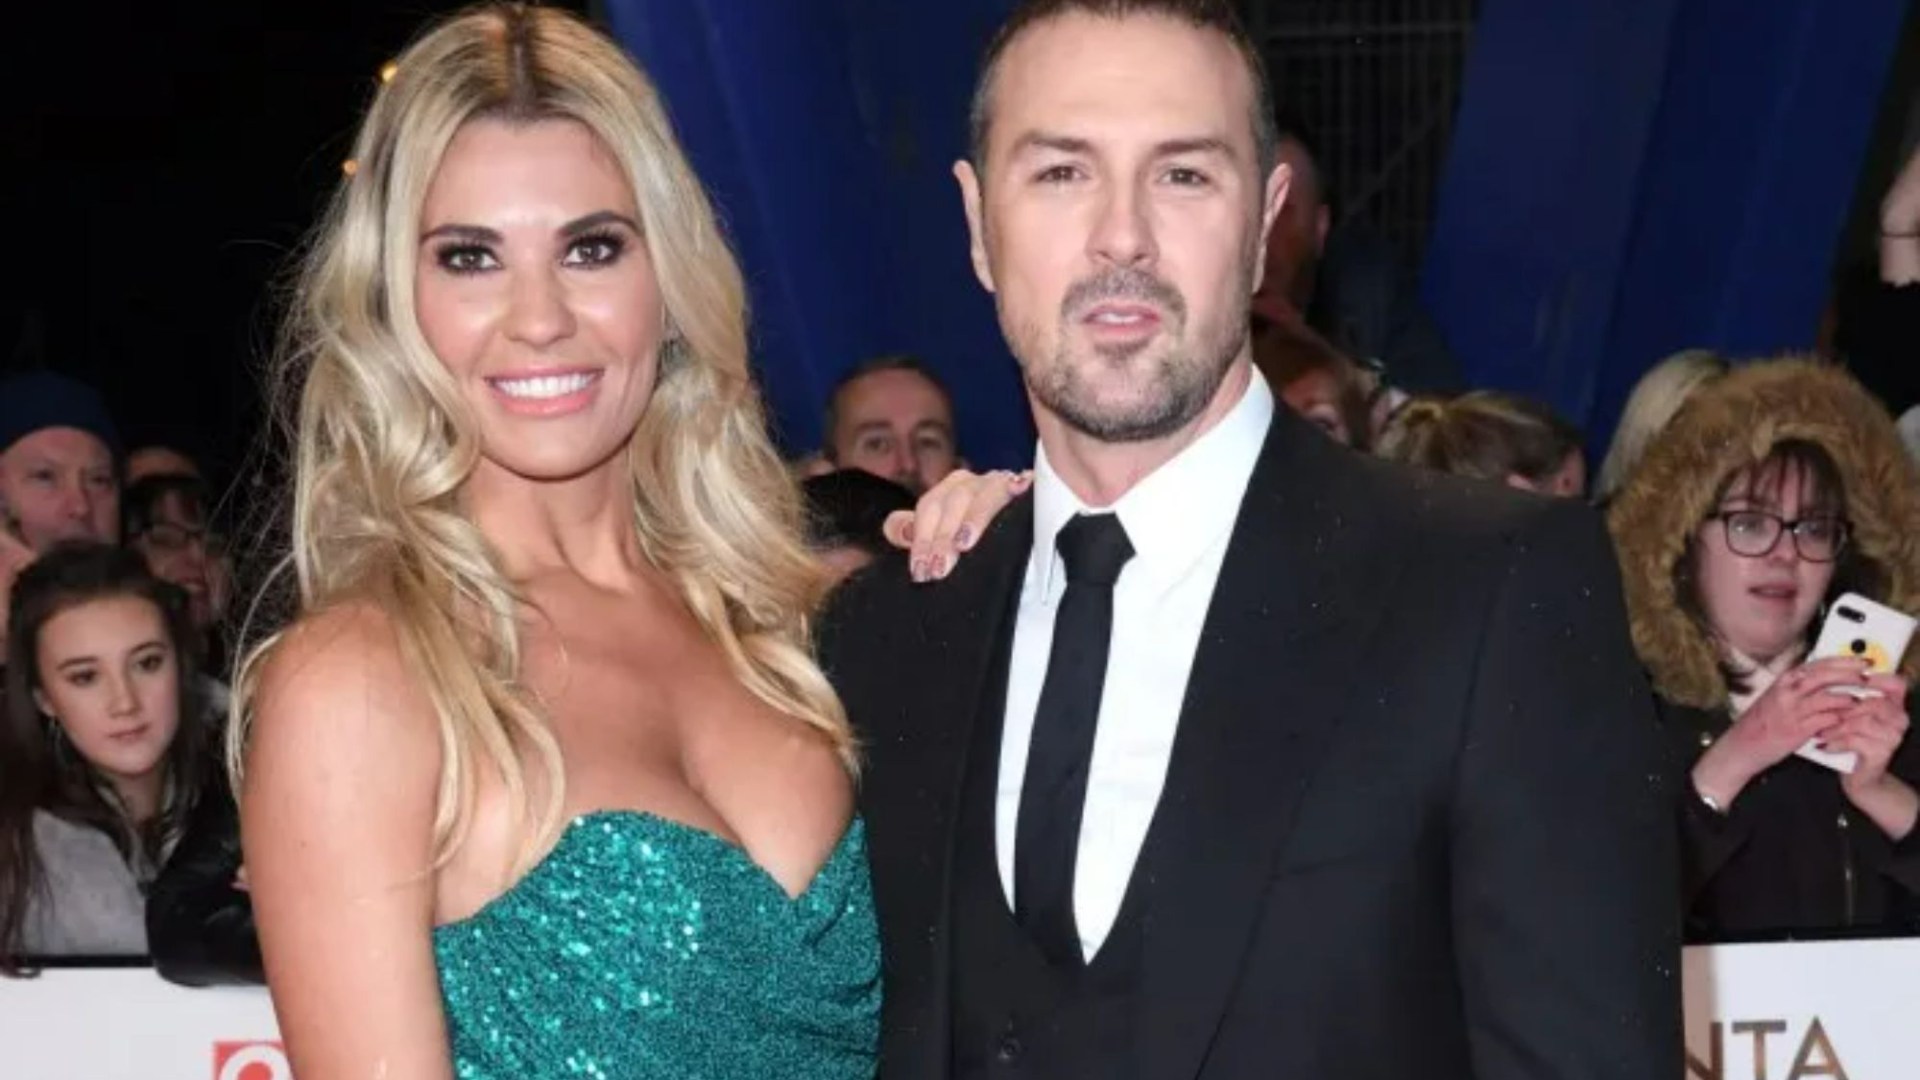 Paddy McGuinness Spills the Tea: Dating While Living with Ex – Relationship Status Revealed